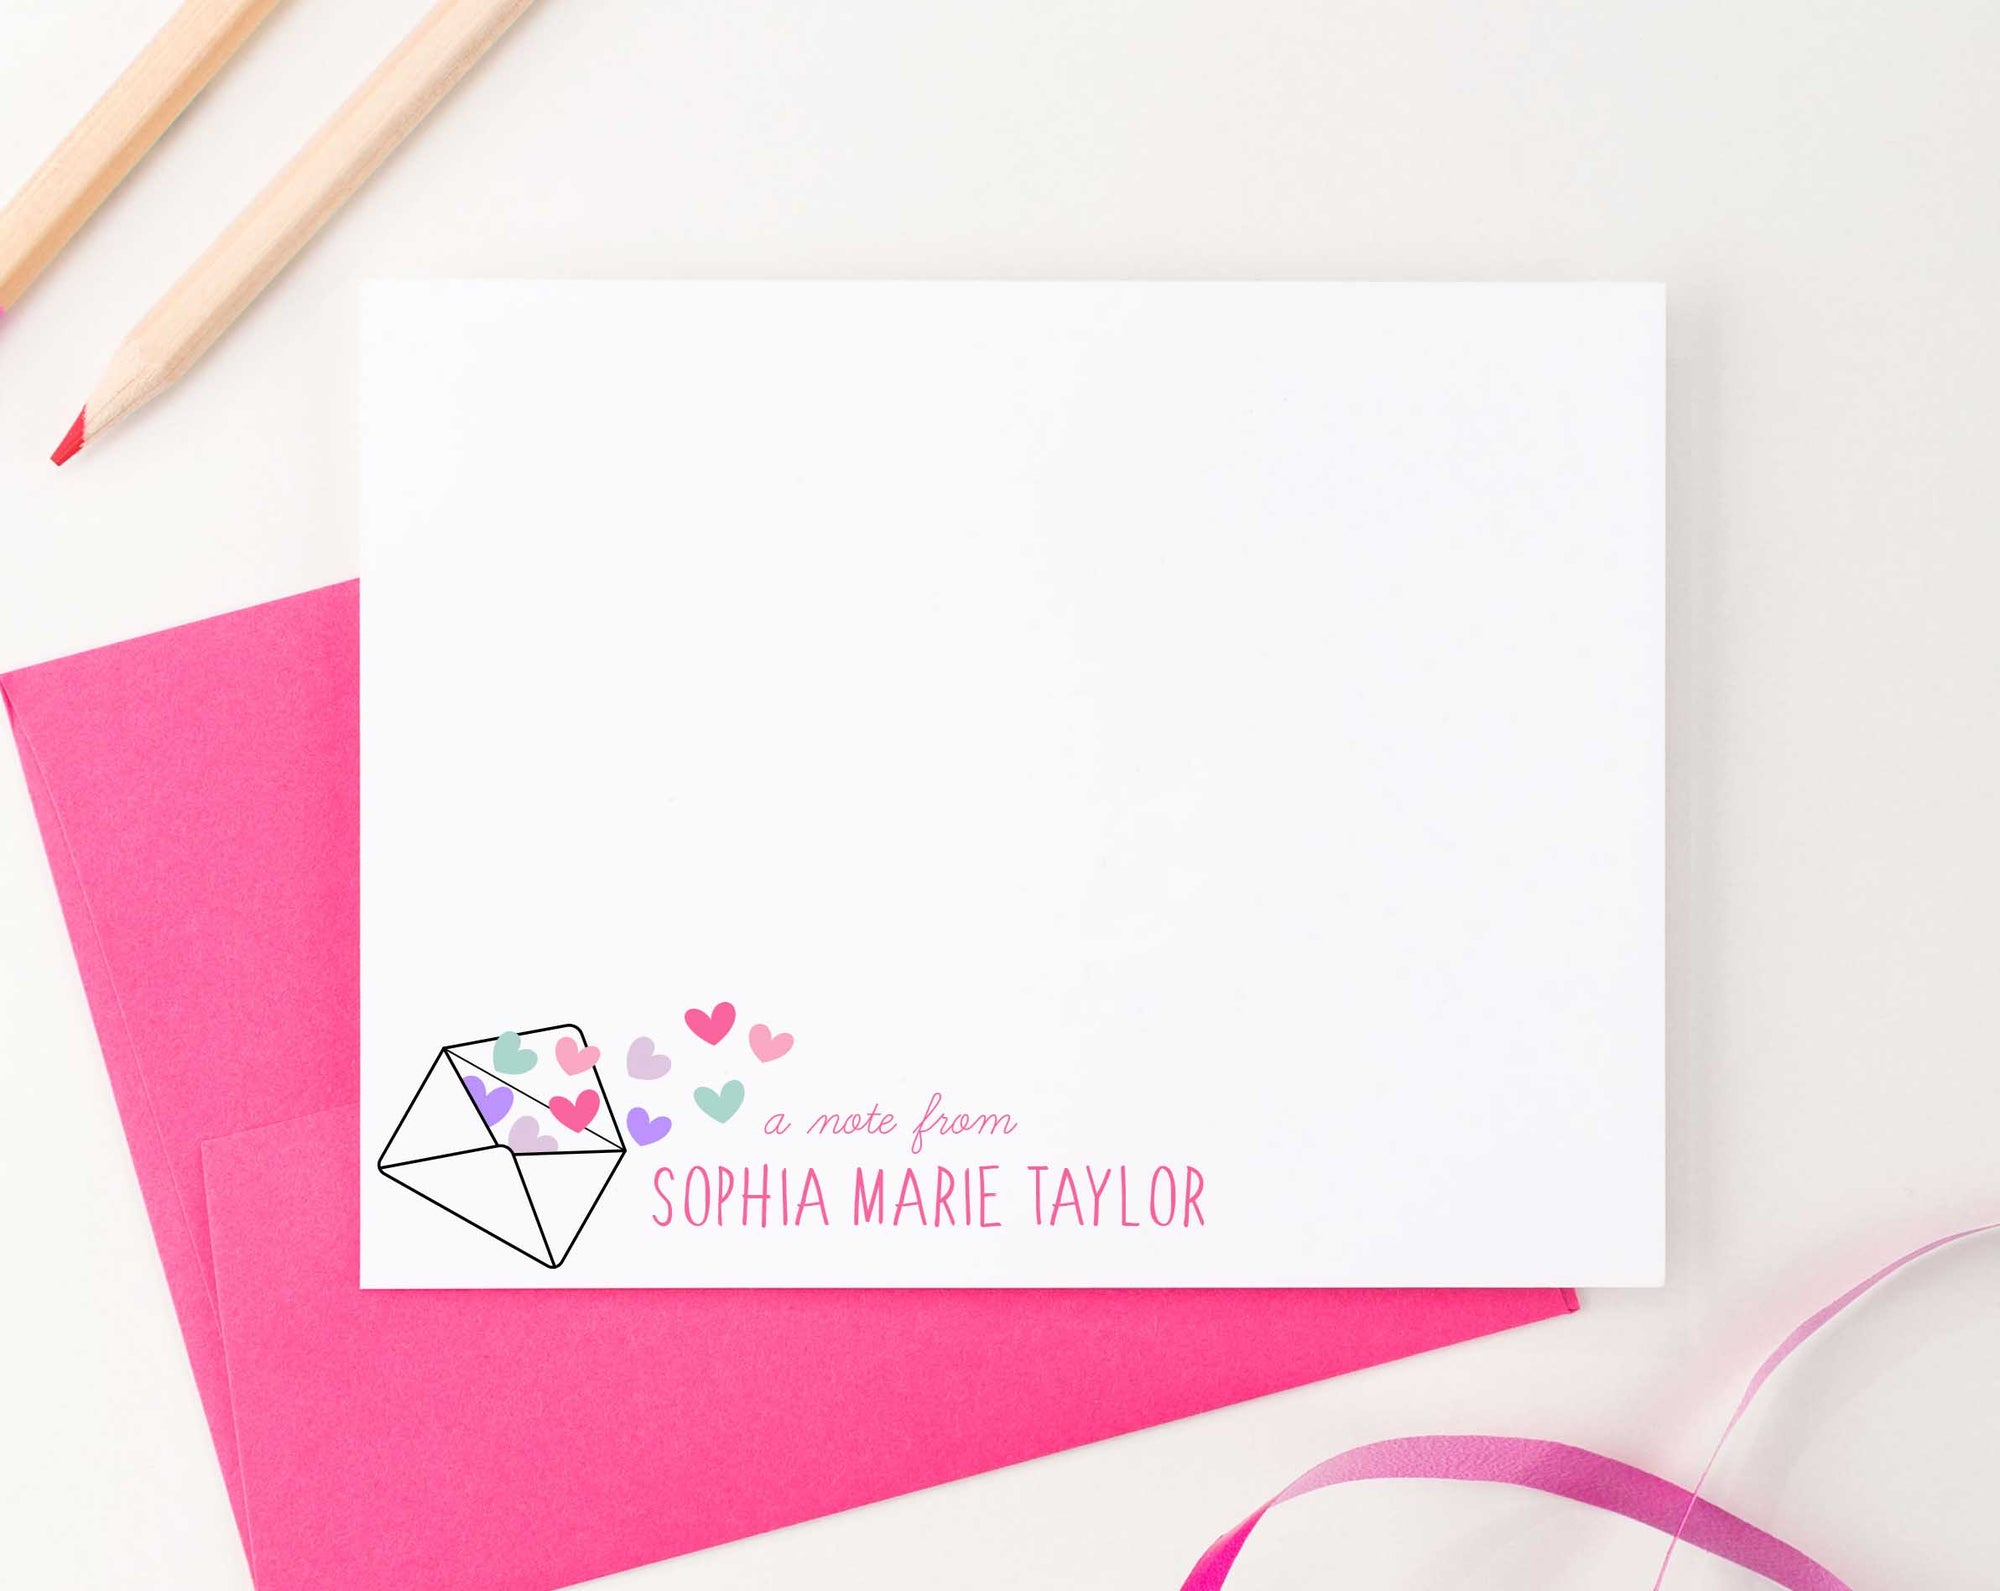 KS123 a note from note cards personalized with envelope and heart shear cute fun 4